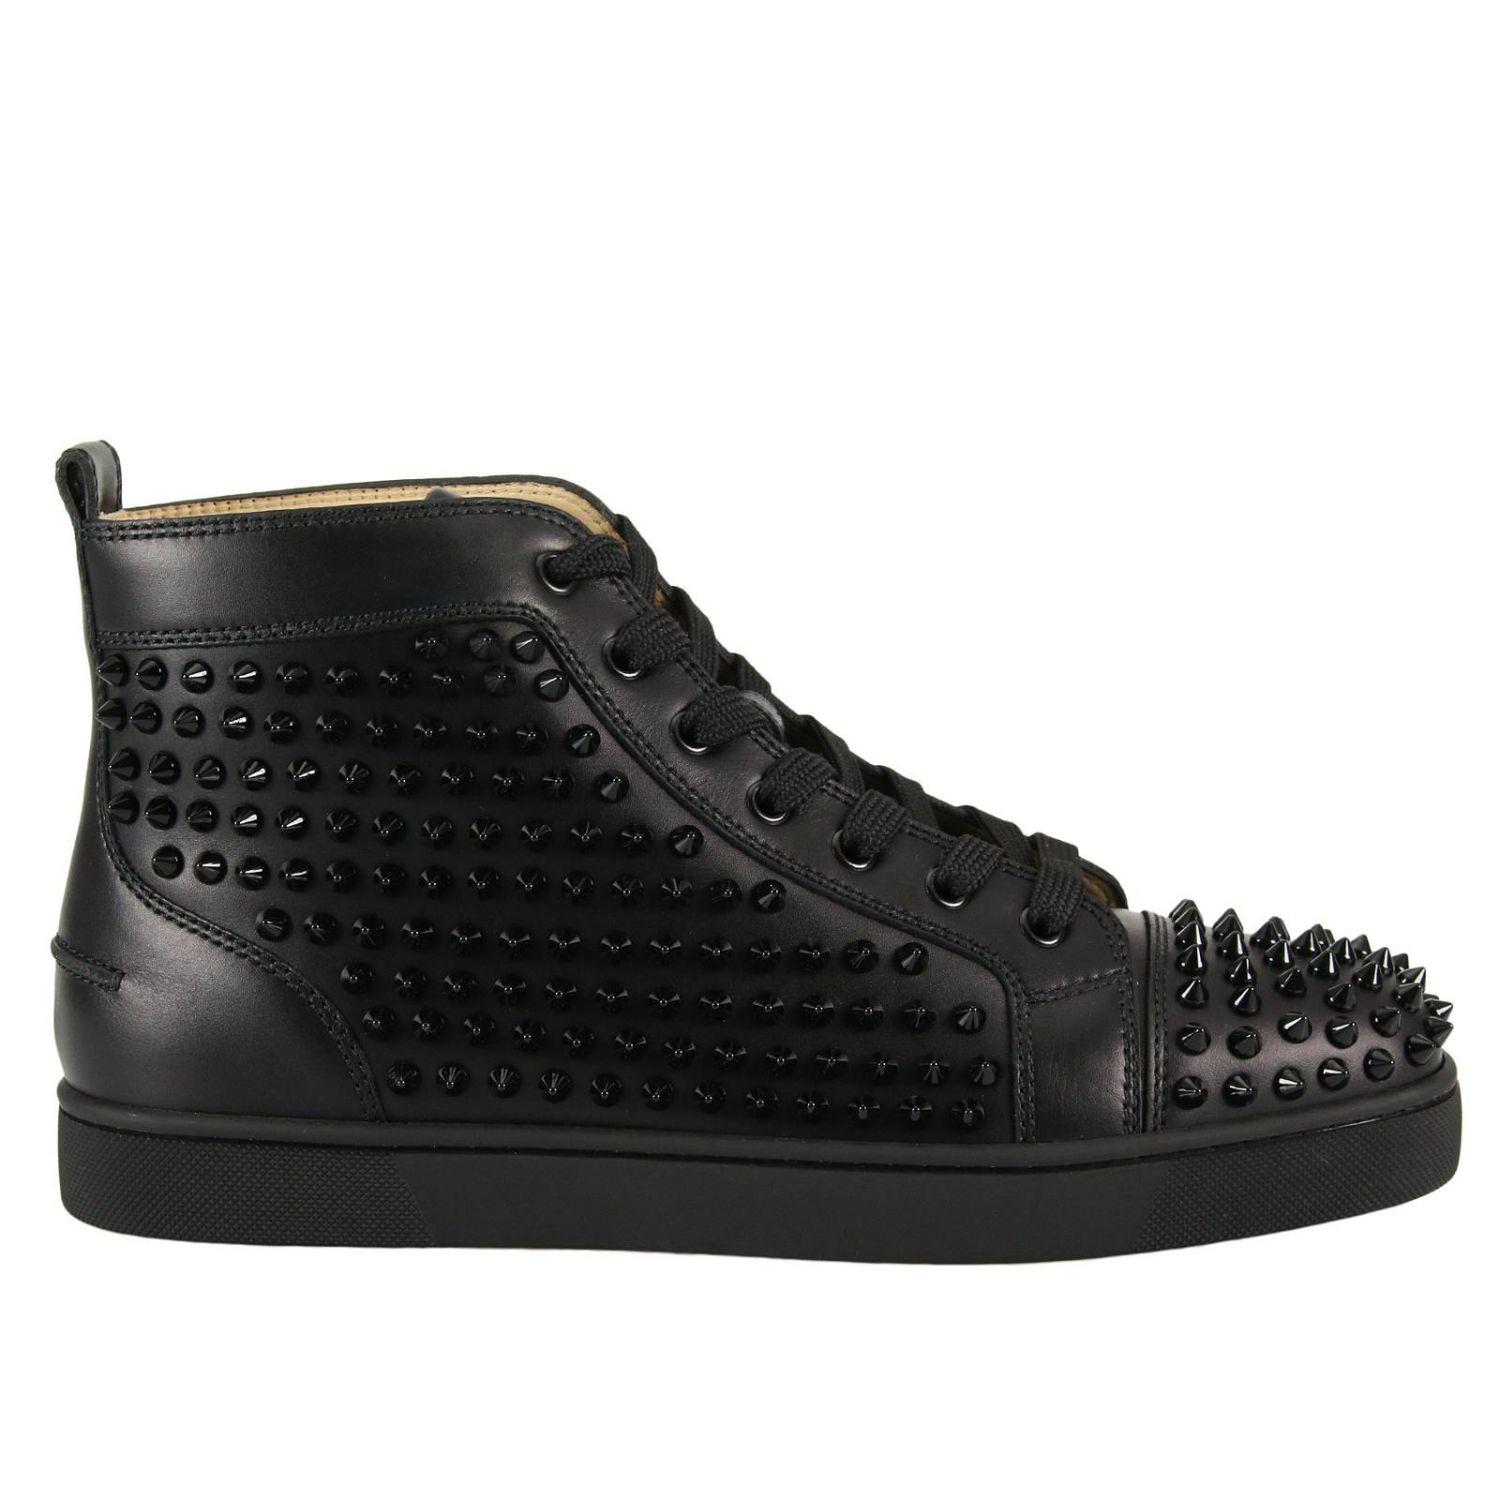 Christian Louboutin Studded Louis High-top Sneakers in Black for Men - Lyst